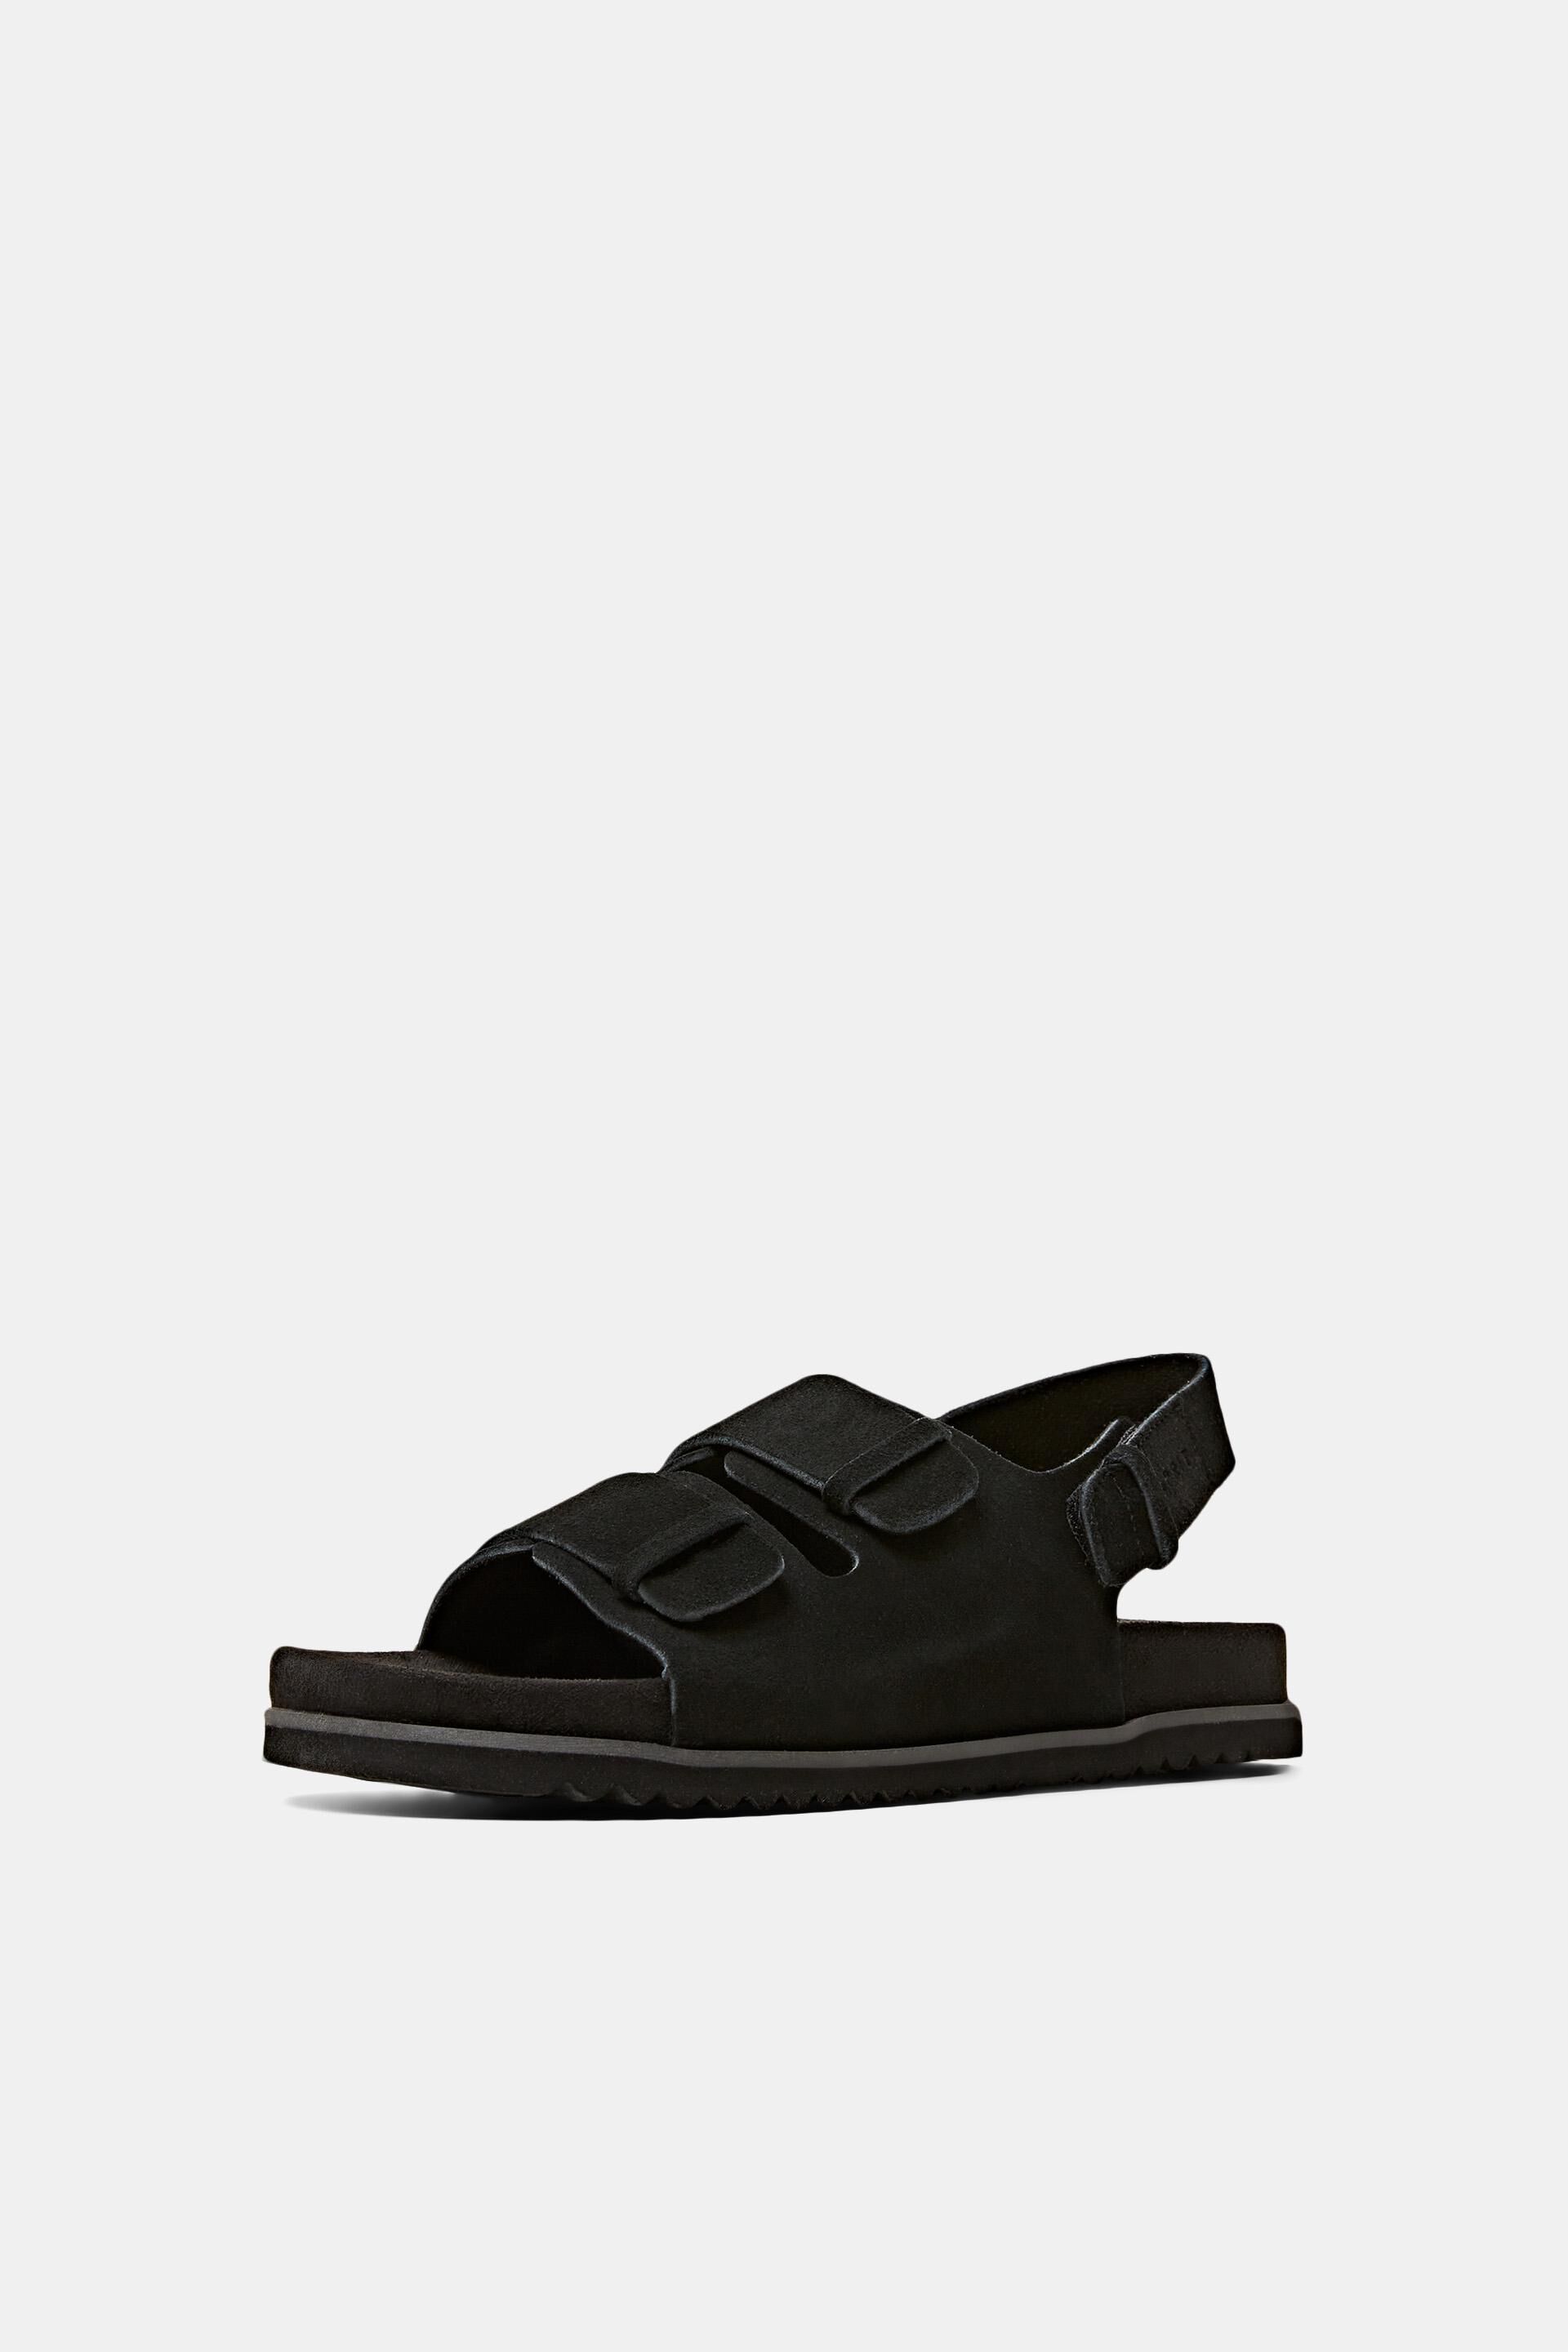 Buy TF STAR Men?s Arizona Cow Suede Leather Slide Sandals,2-Strap  Adjustable Buckle,Casual Slippers, Slide Cork Footbed shoes Online at  Lowest Price Ever in India | Check Reviews & Ratings - Shop The